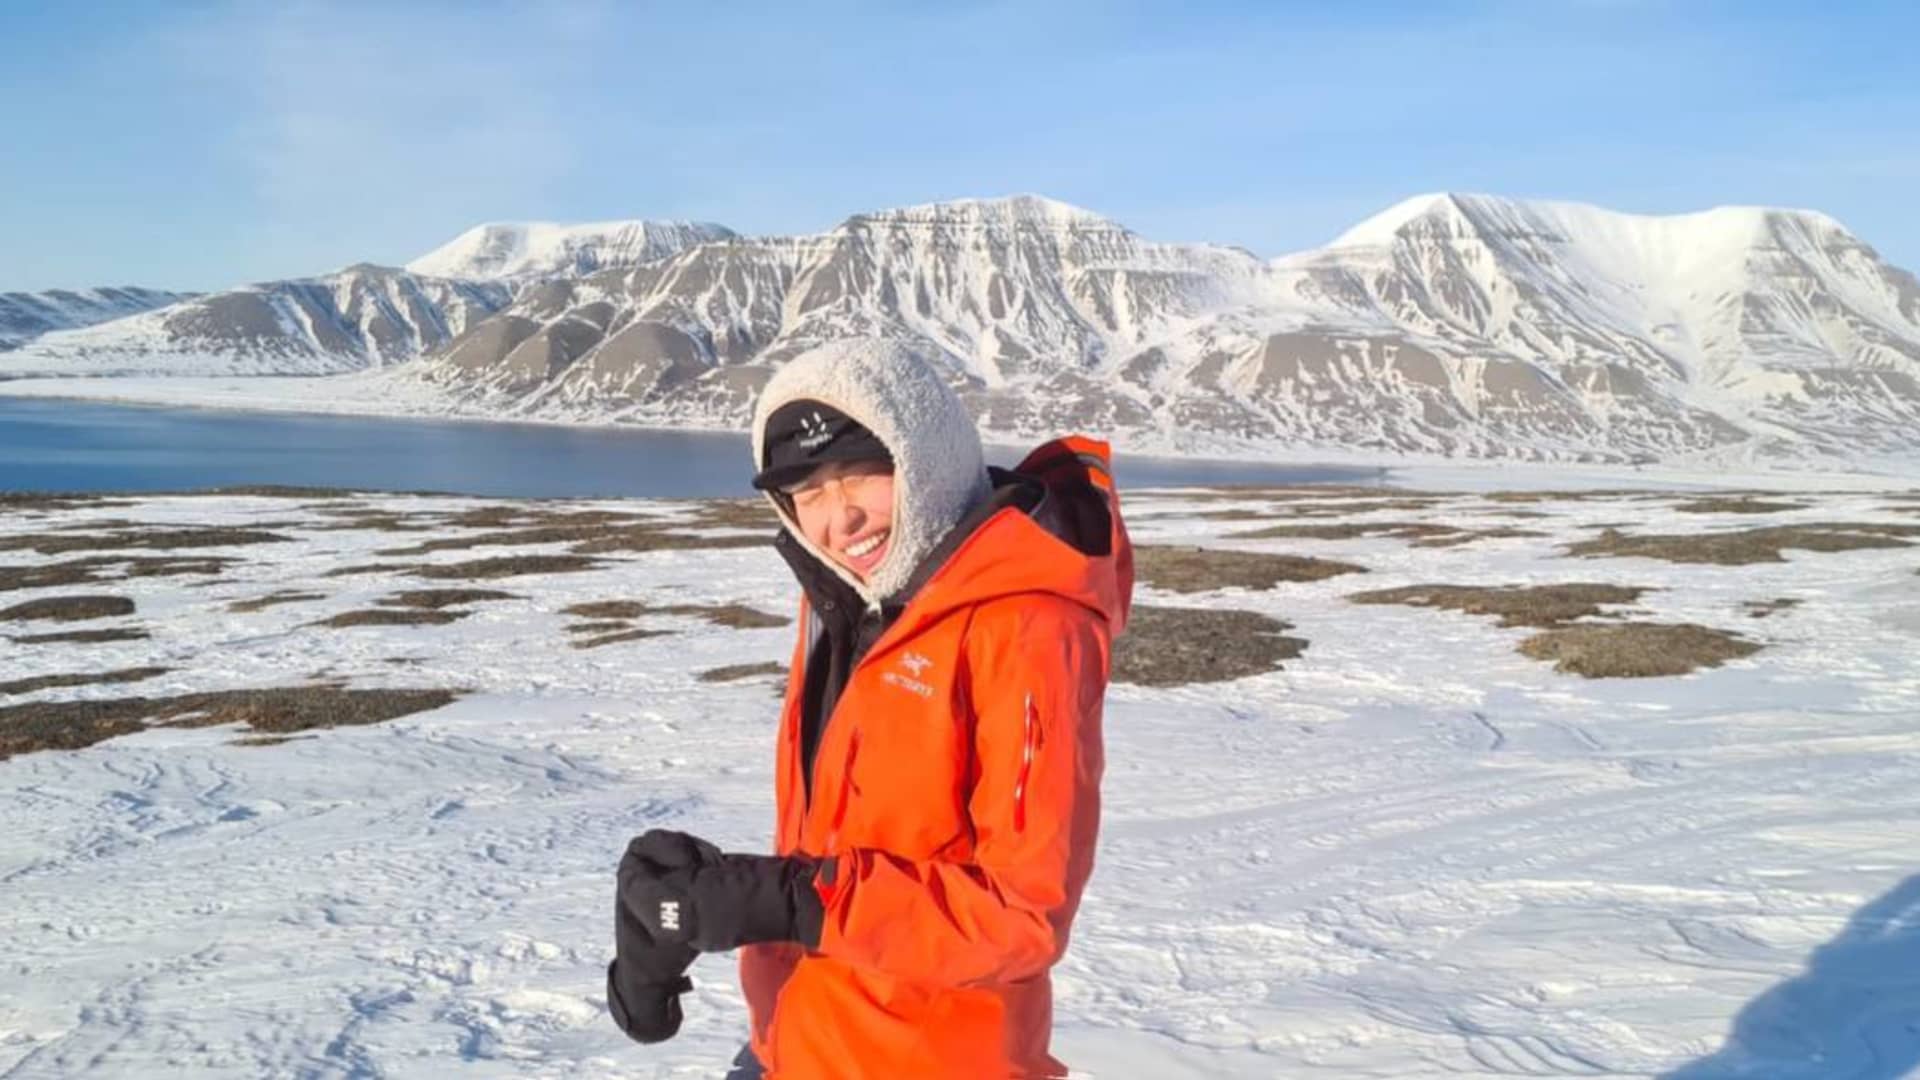 Weisi Low spends most of her time in Svalbard outdoors, enjoying views of snow-capped mountains and the glaciers.